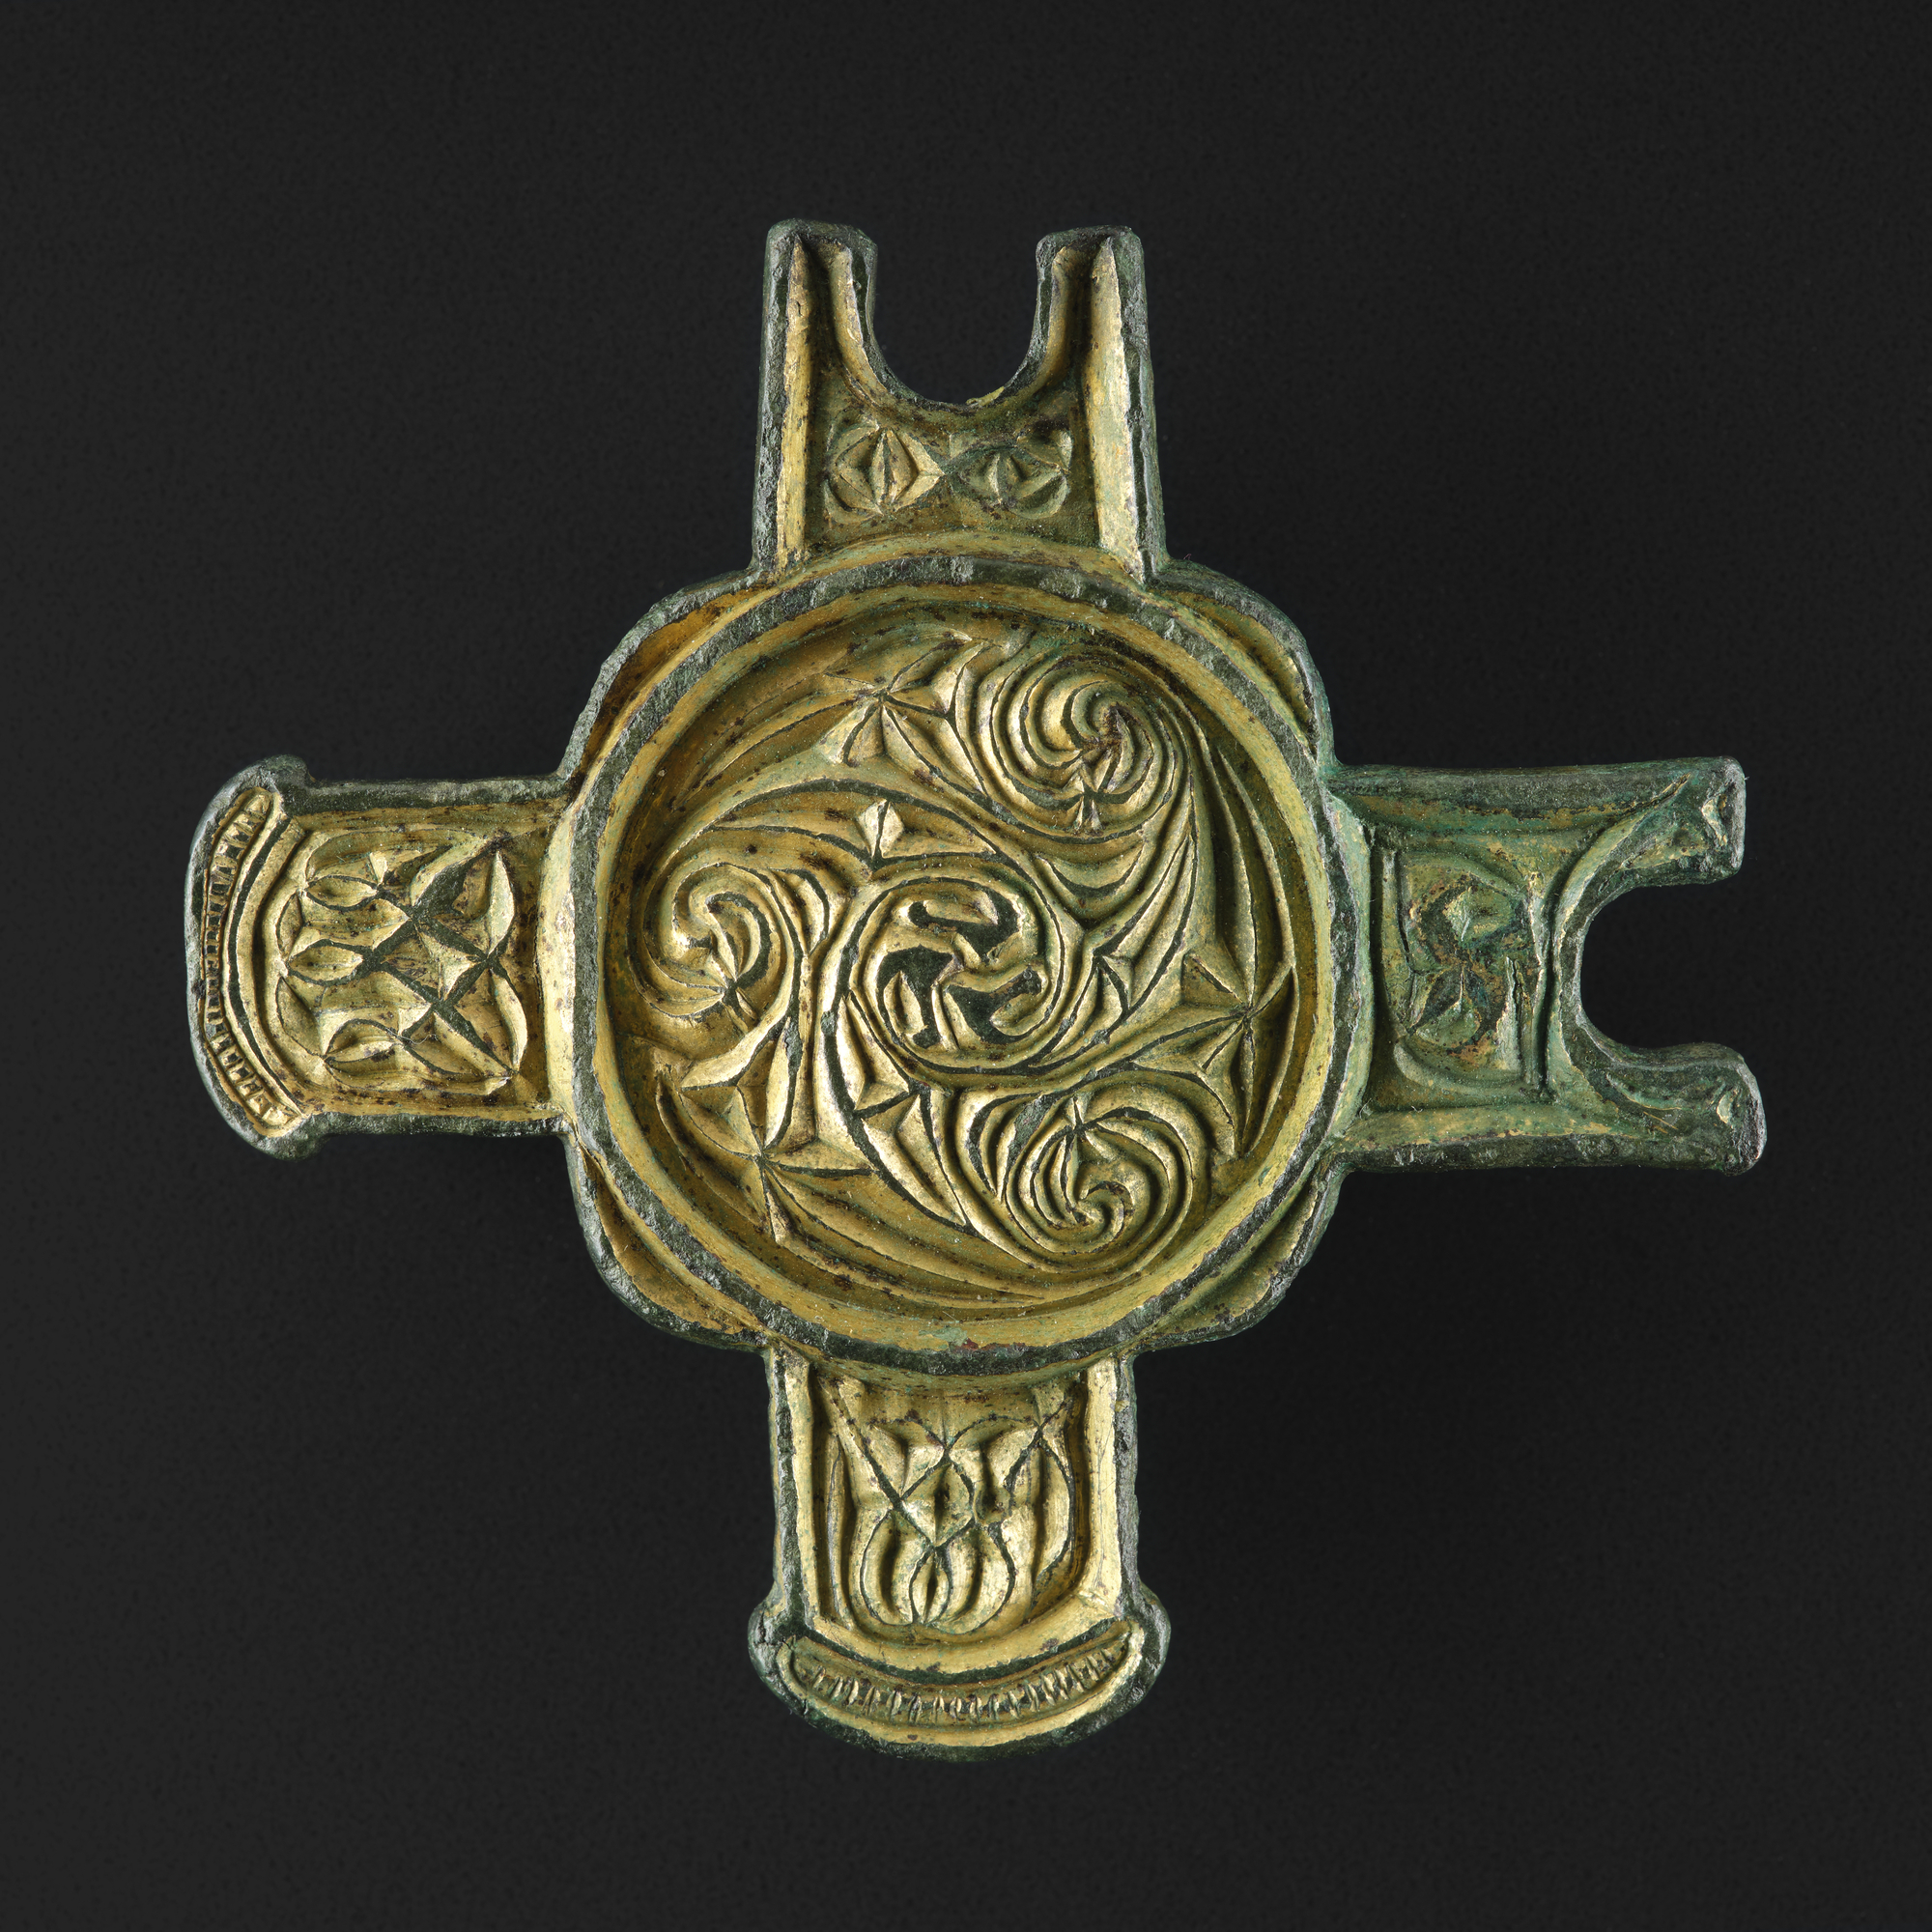 Image of Cruciform mount of gilt copper alloy, from the west of Scotland © National Museums Scotland